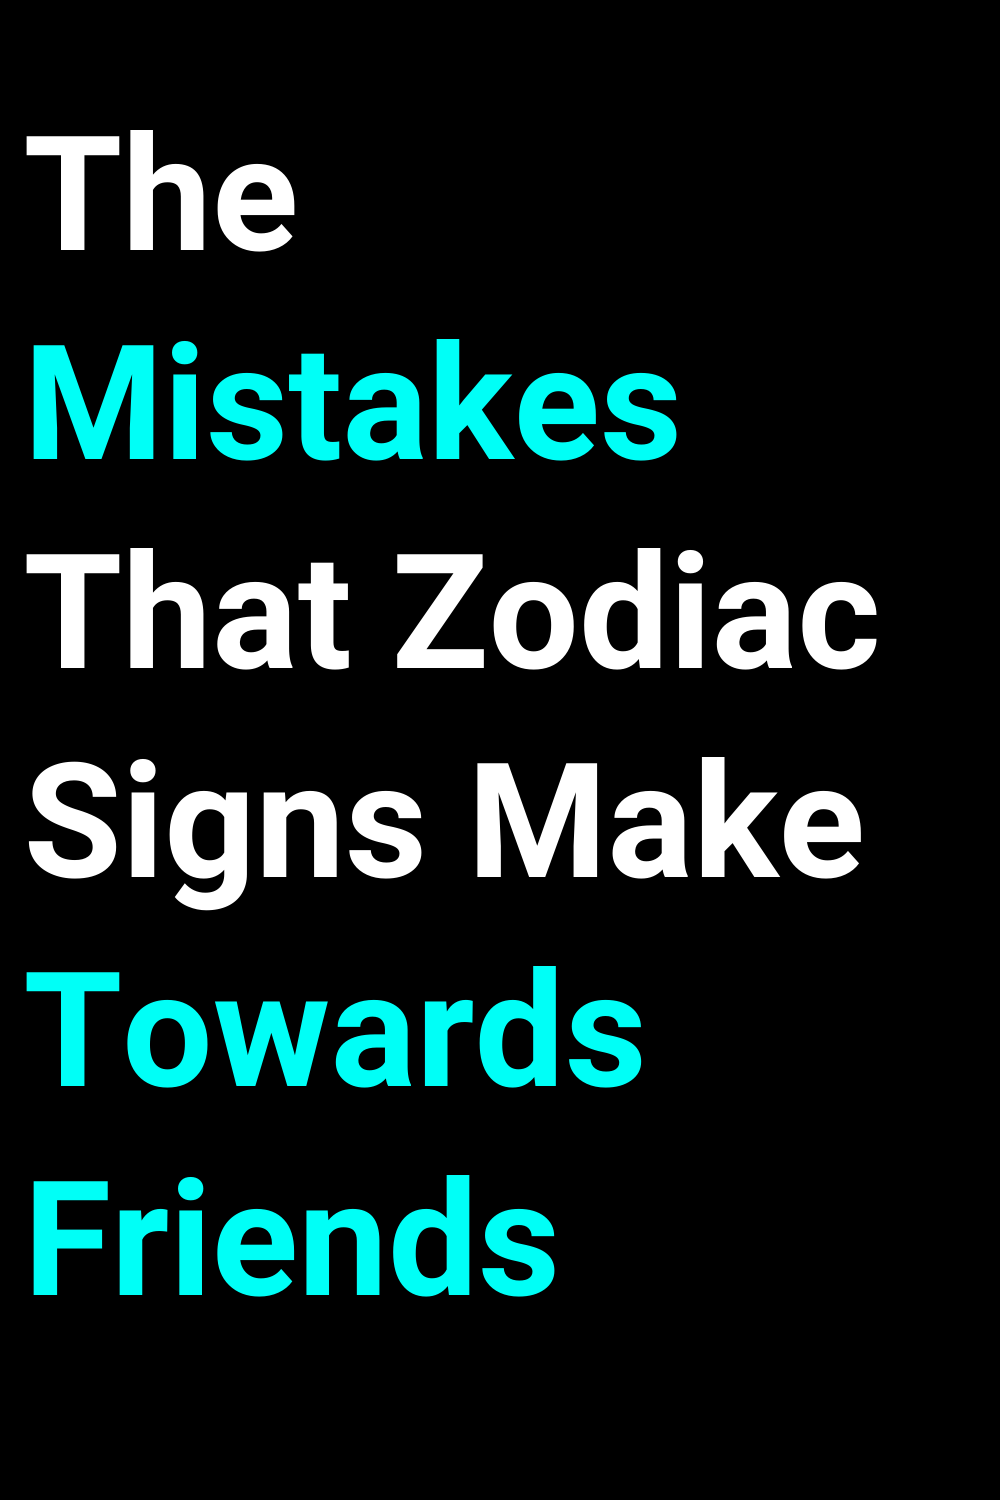 The Mistakes That Zodiac Signs Make Towards Friends